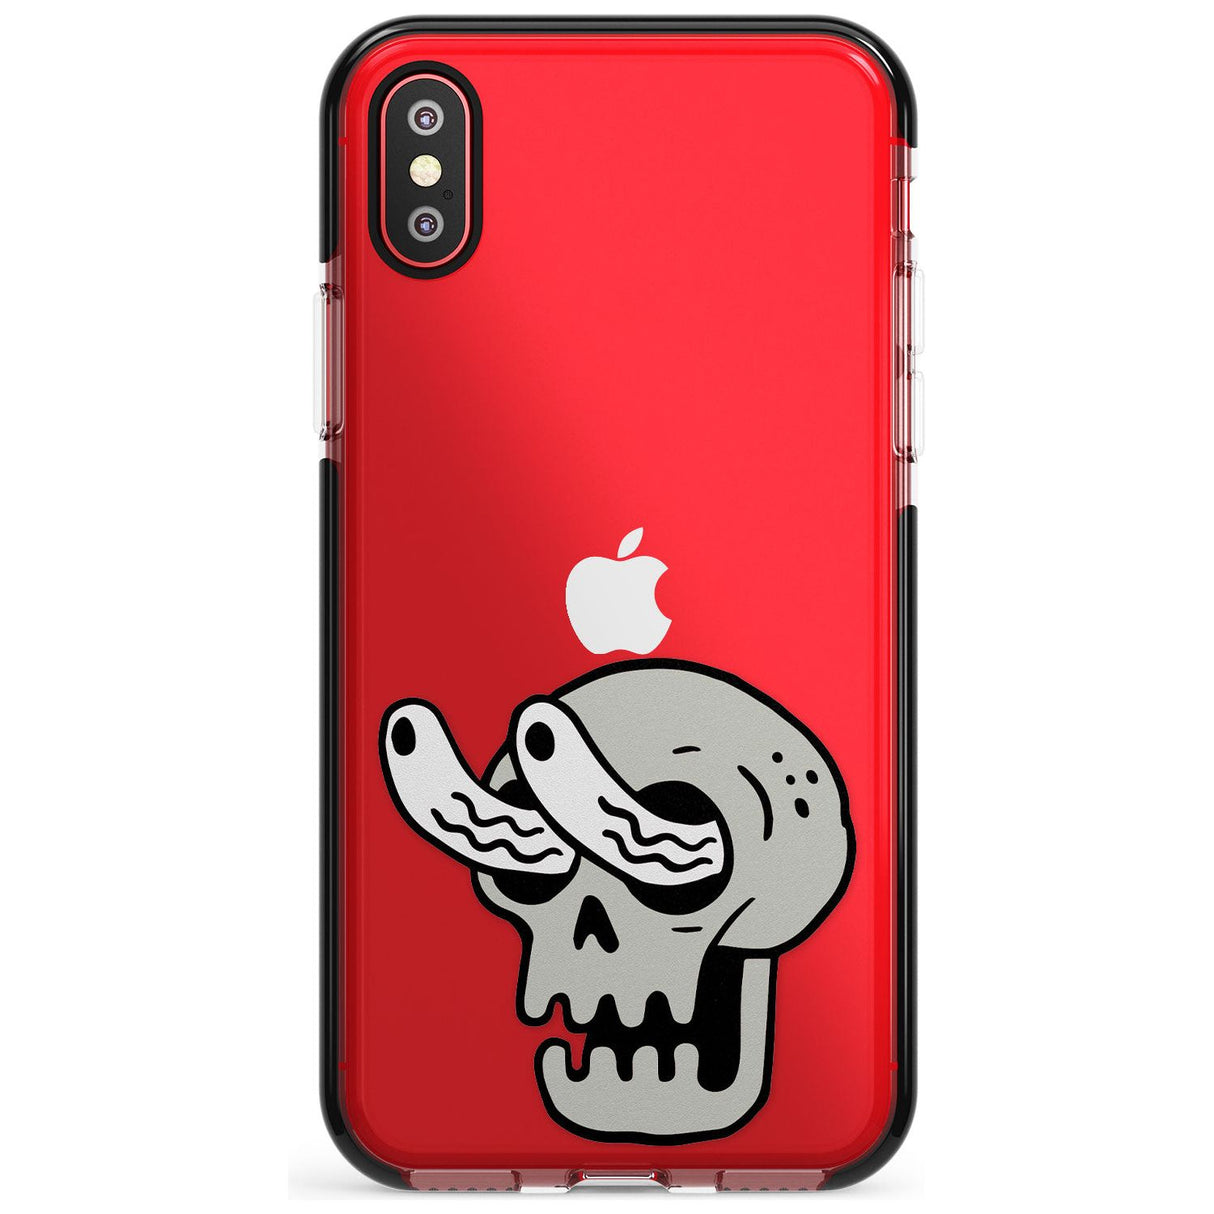 Skull Eyes Black Impact Phone Case for iPhone X XS Max XR